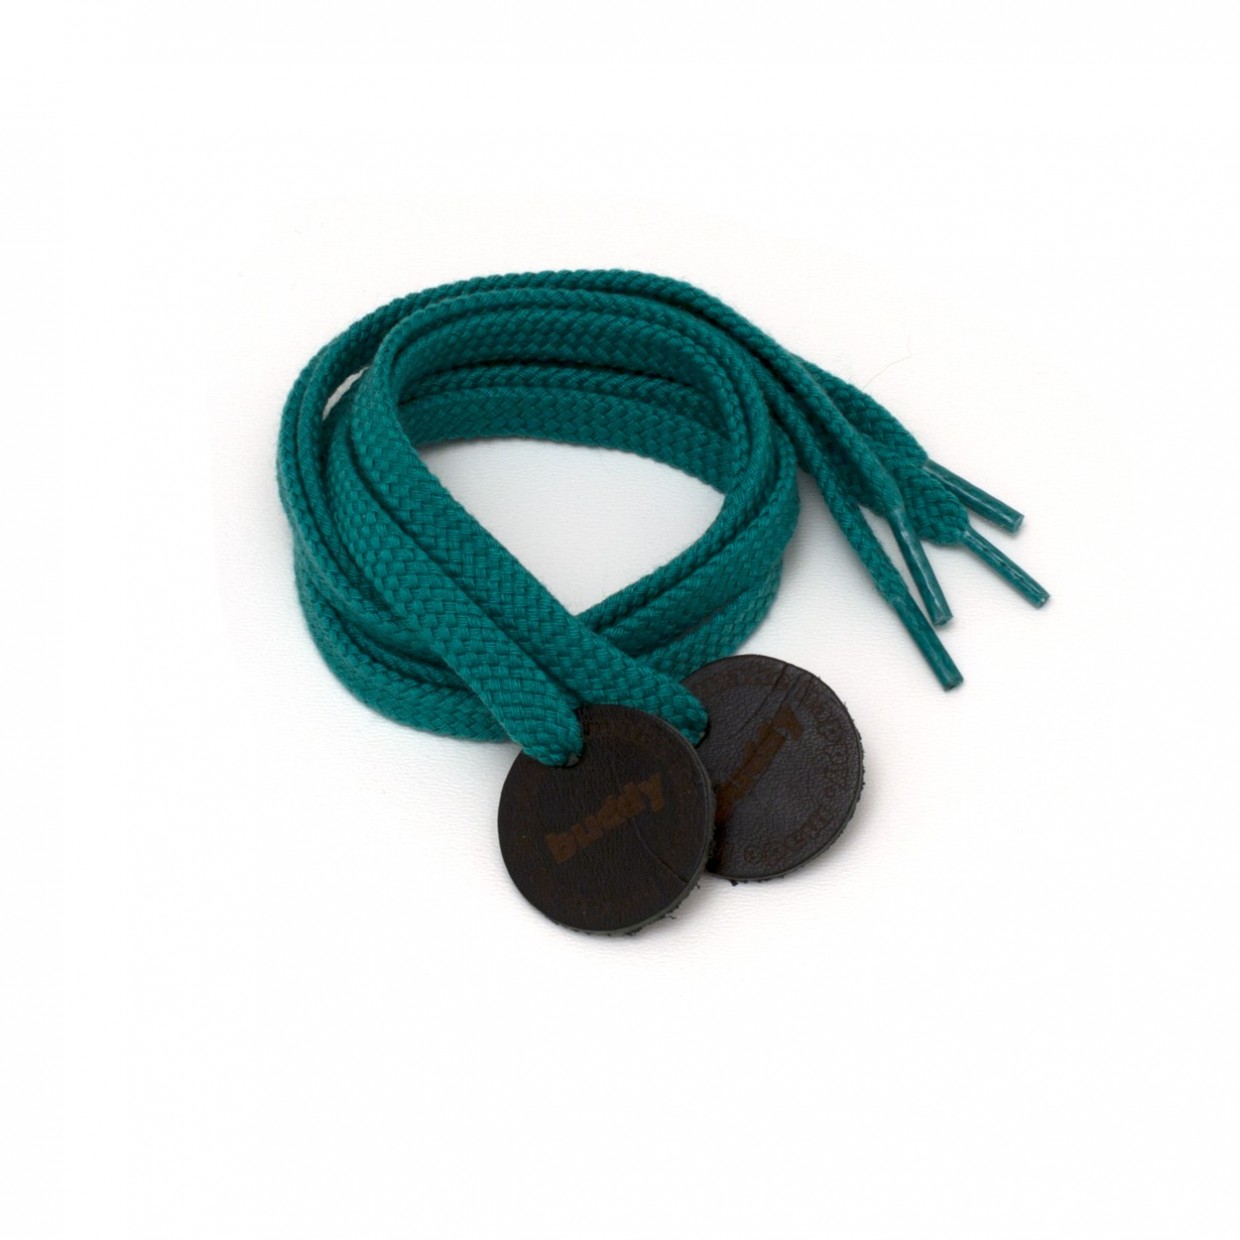 Shoelaces Green with Leather patch 78 cm : 31 "